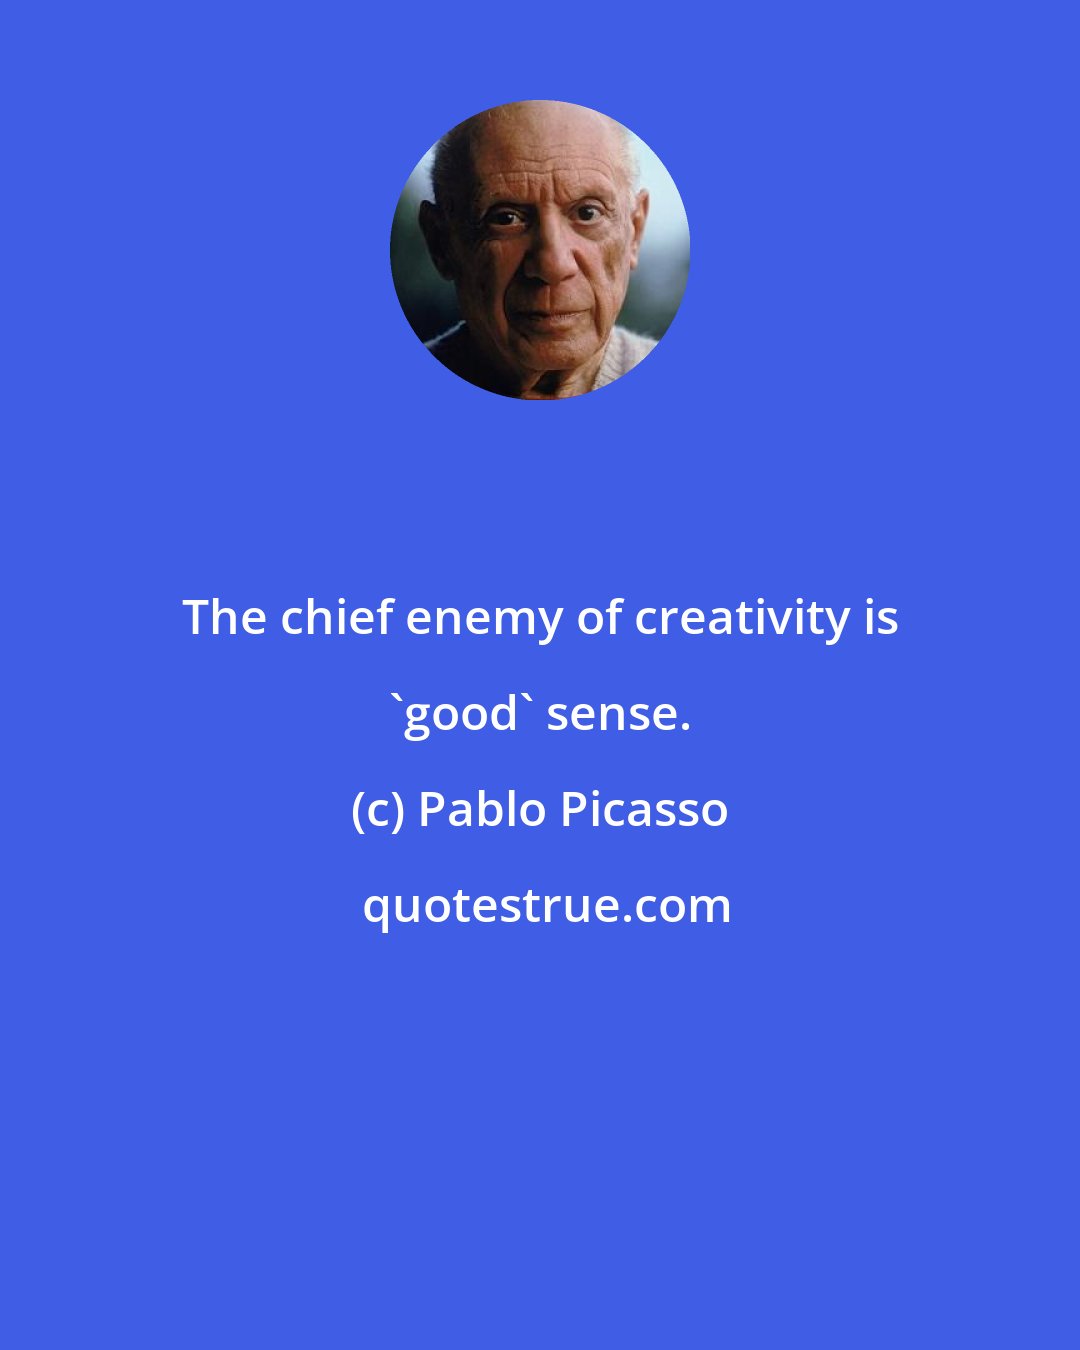 Pablo Picasso: The chief enemy of creativity is 'good' sense.